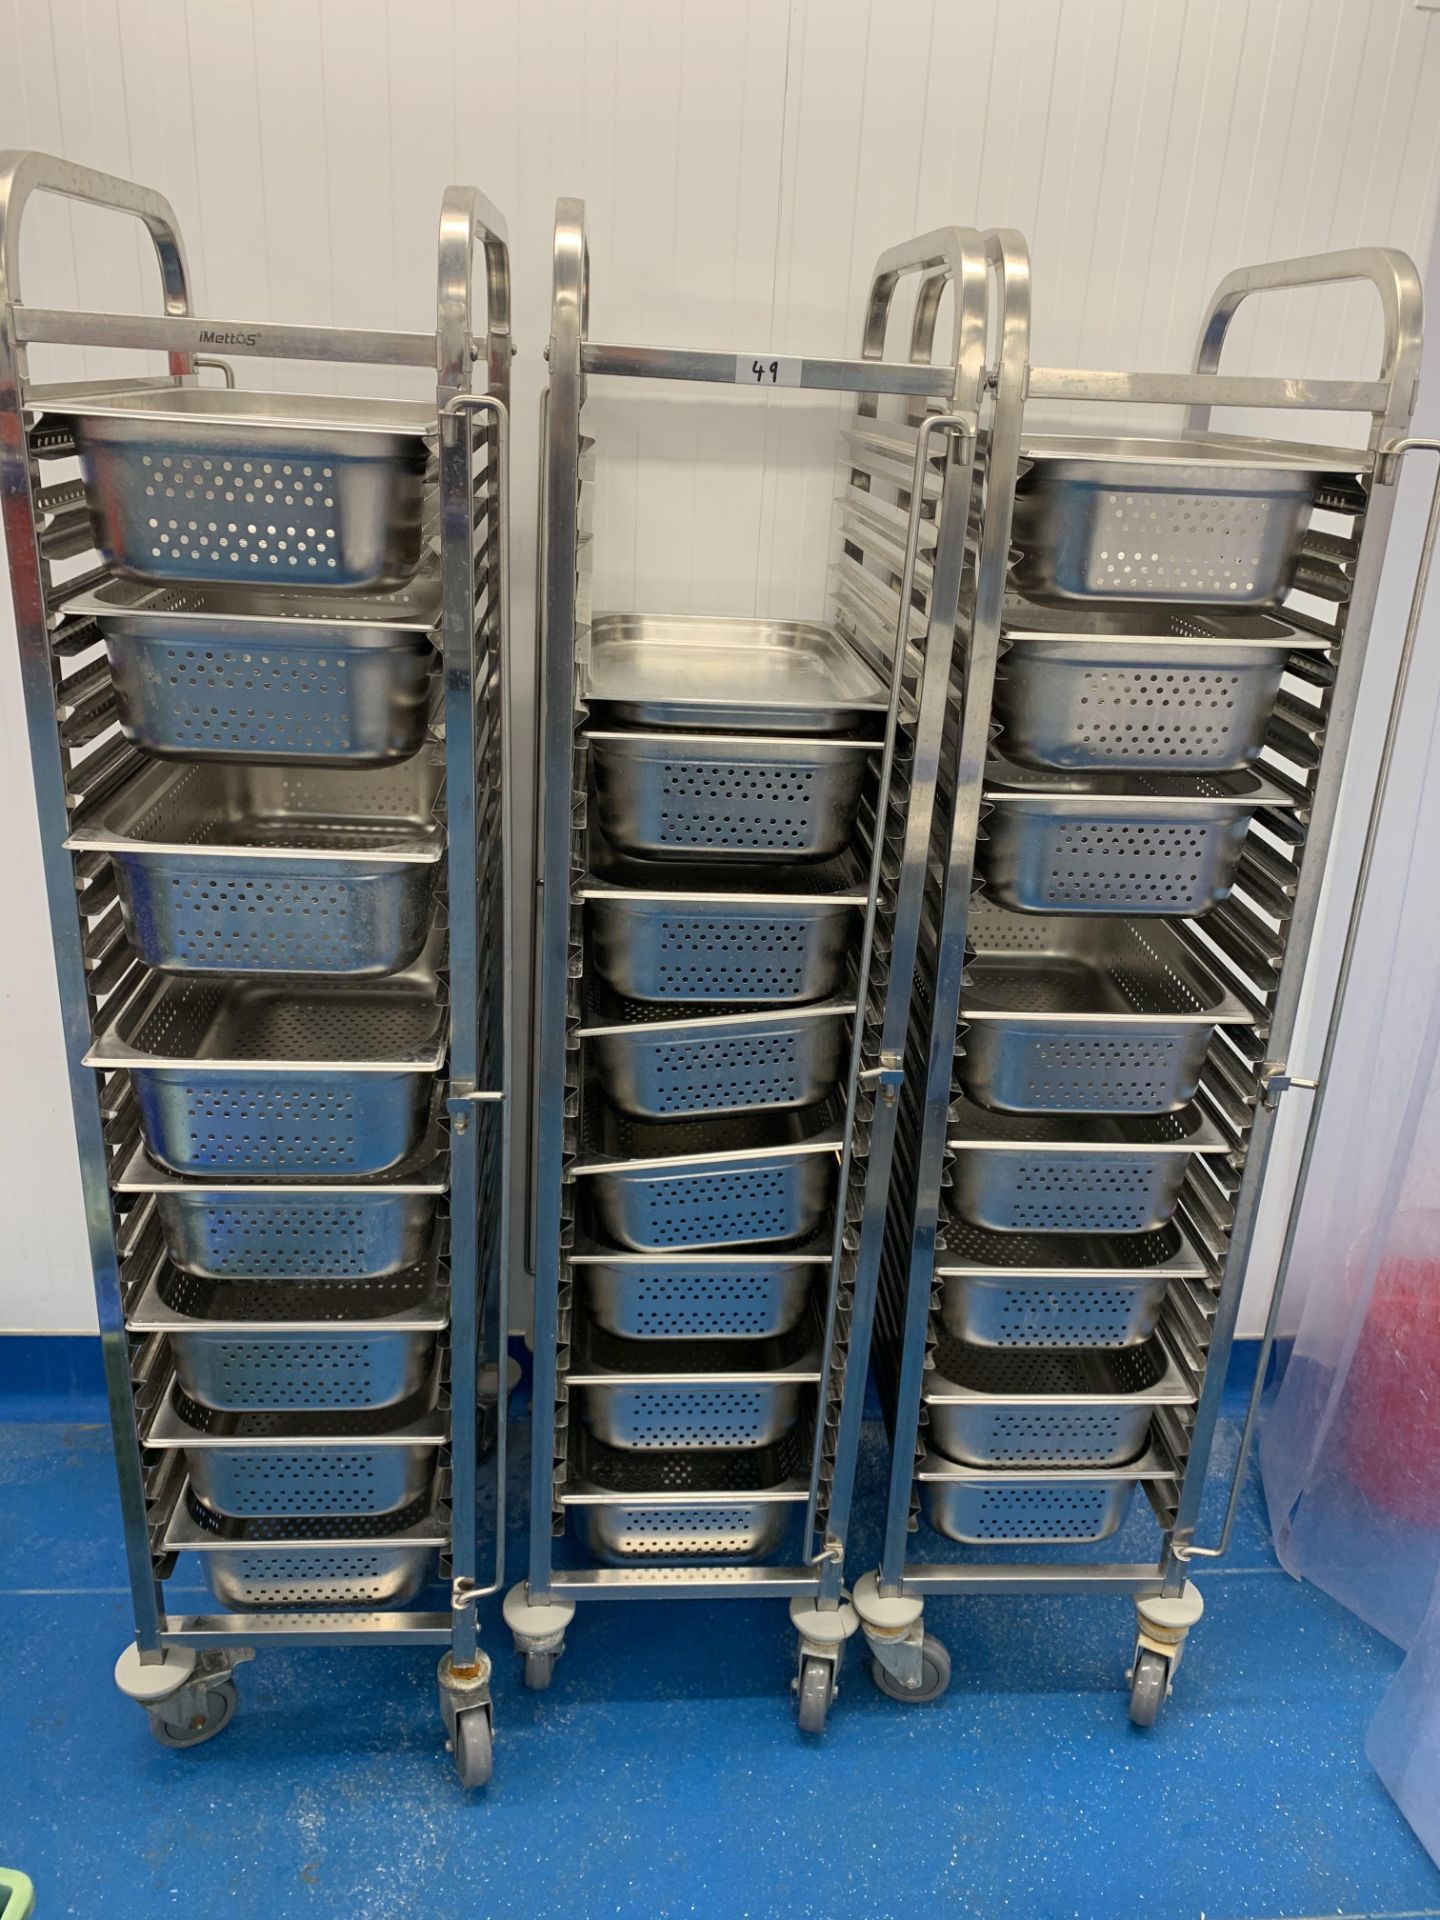 3 x Metos stainless steel rack trolleys with 23 drainers and 1 tray